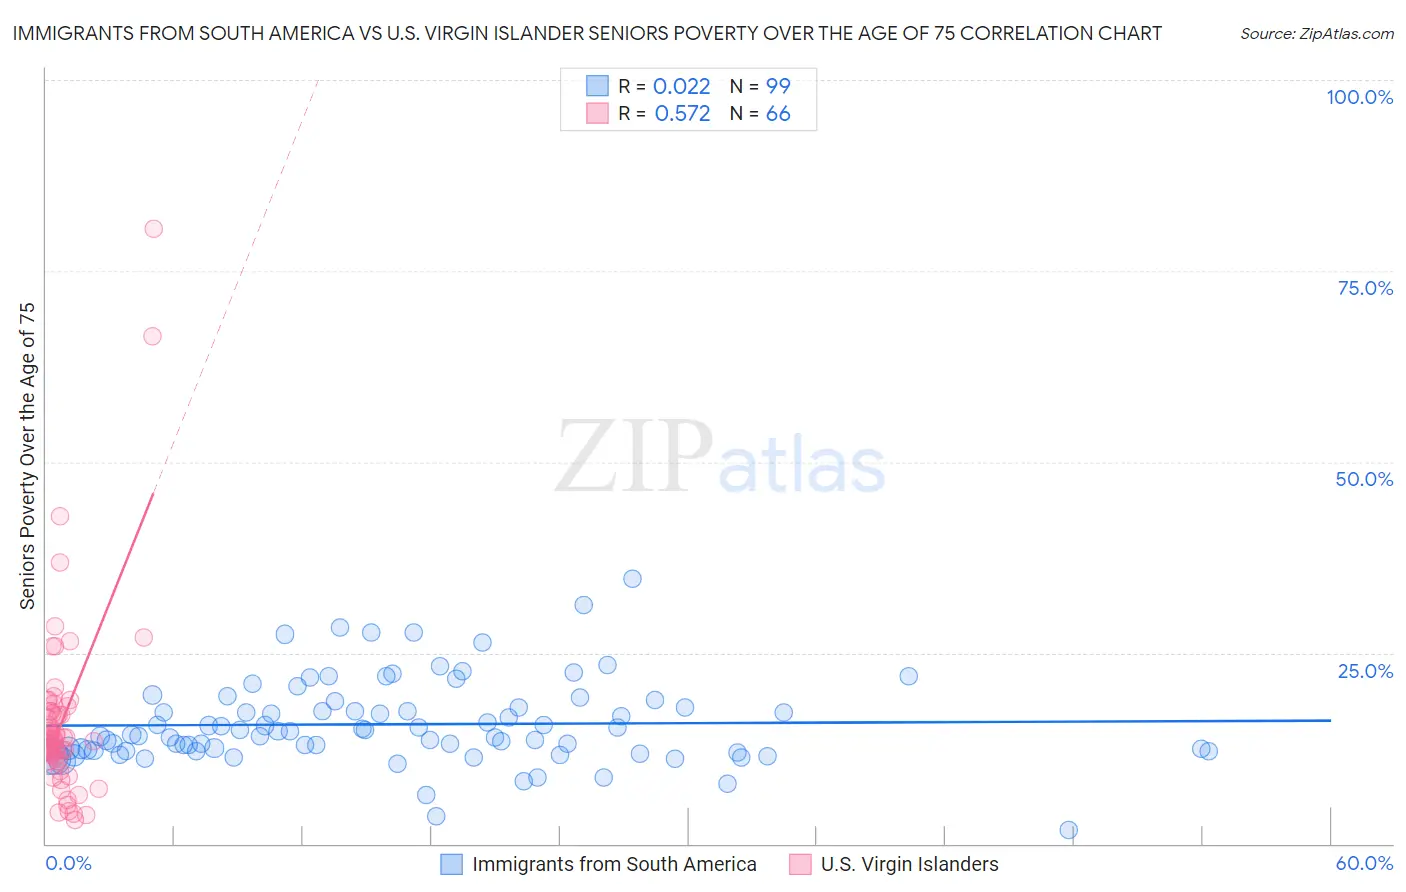 Immigrants from South America vs U.S. Virgin Islander Seniors Poverty Over the Age of 75